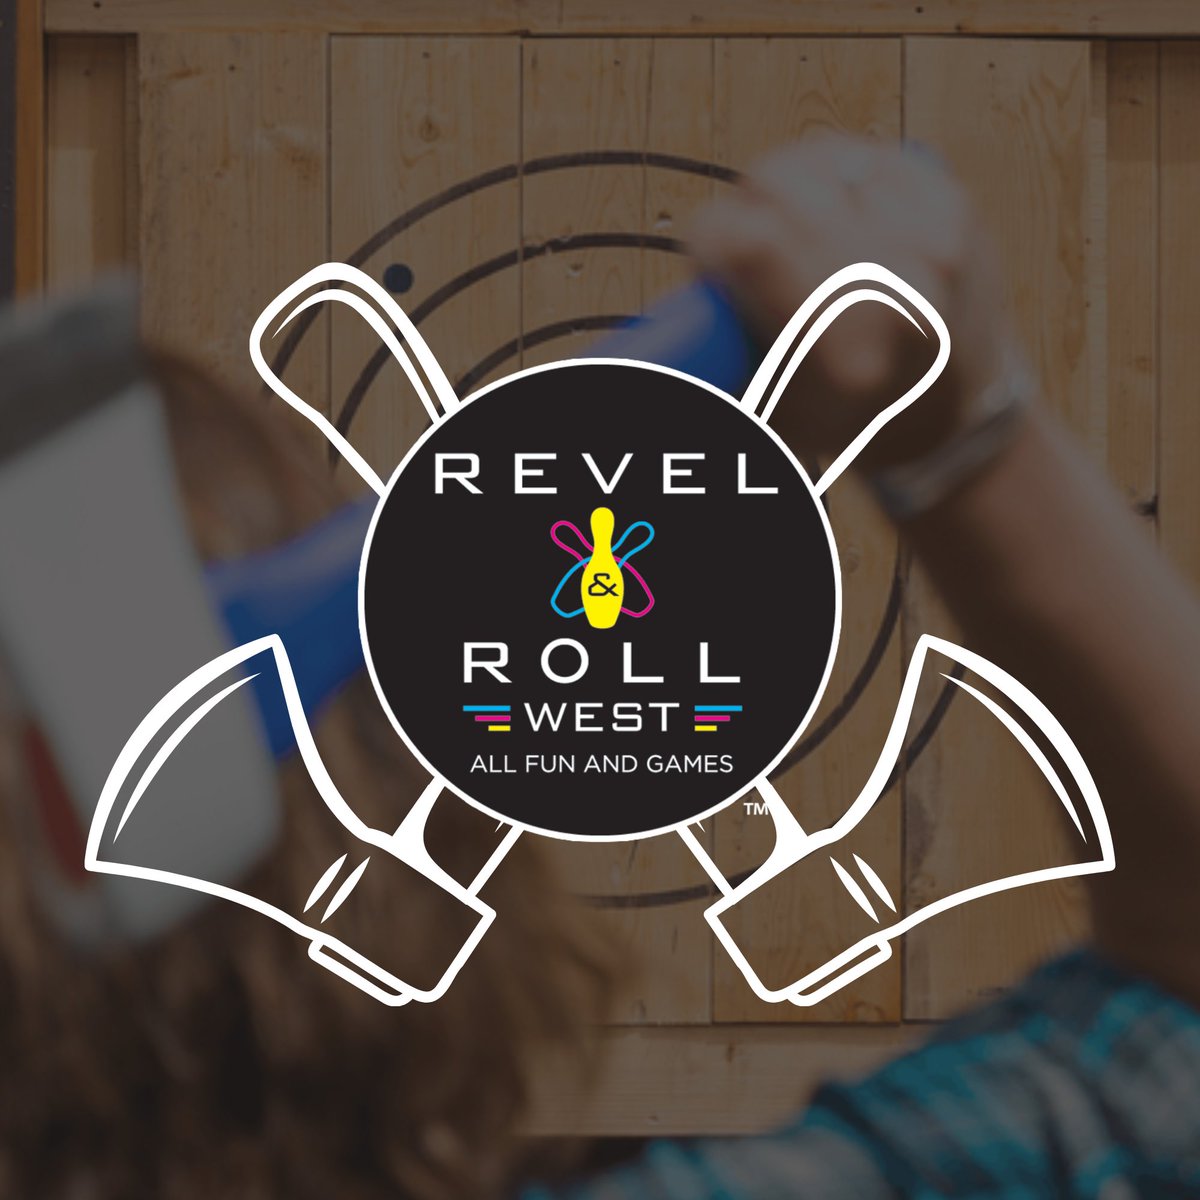 Home - Revel & Roll West